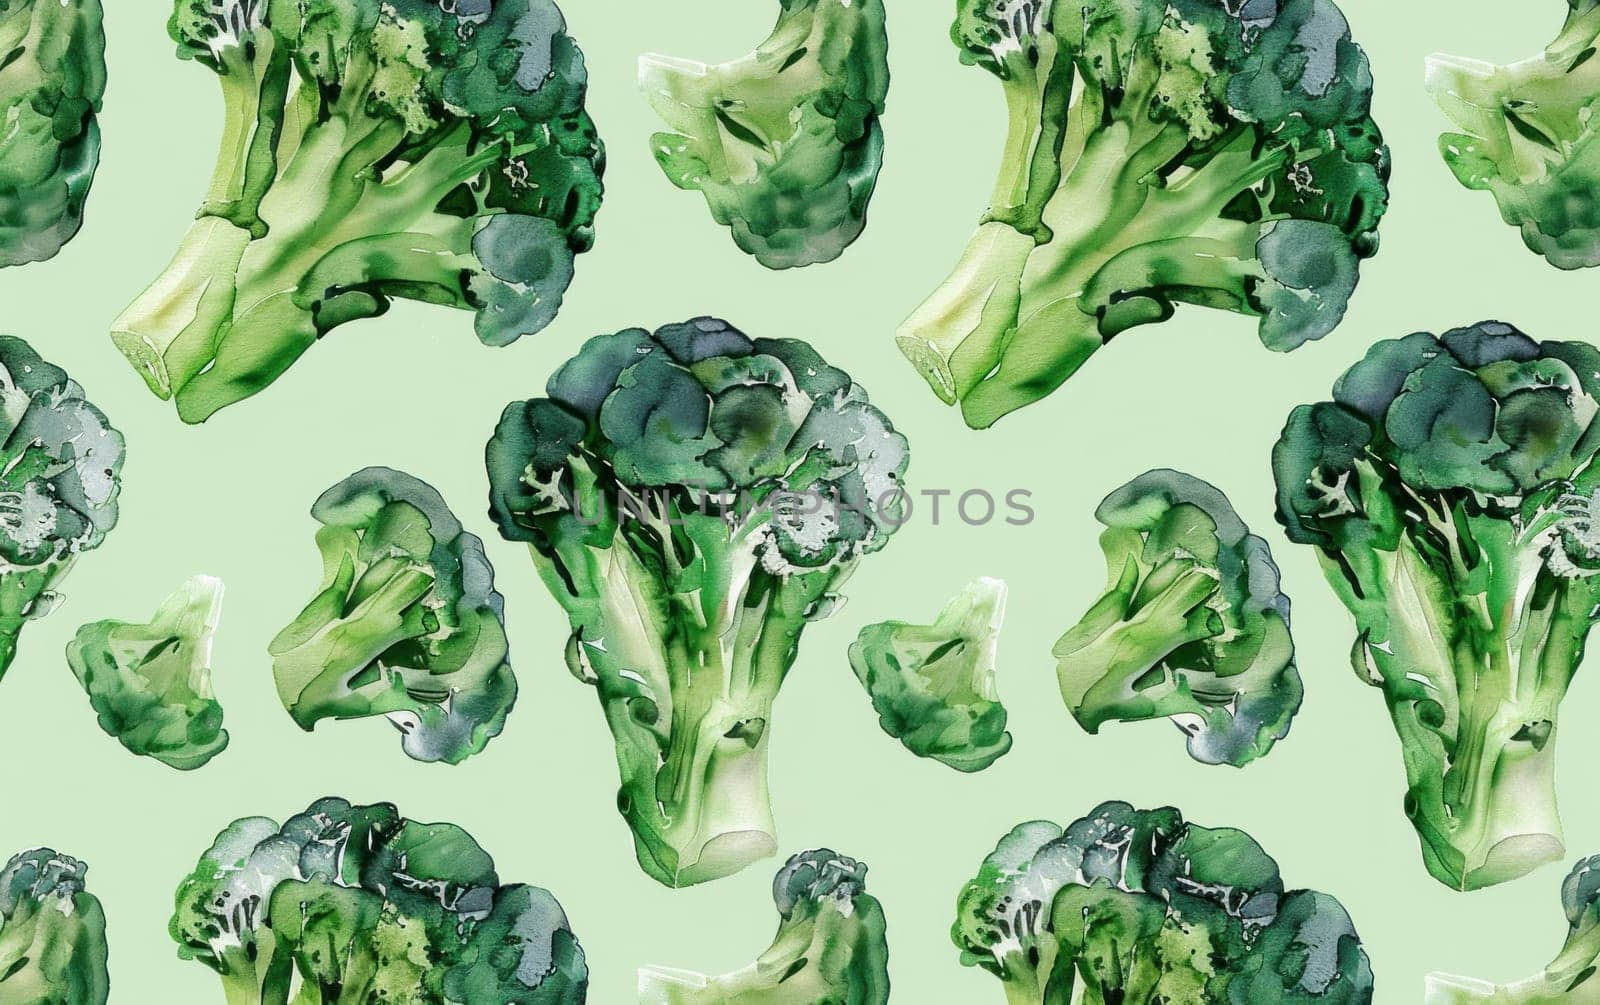 Pattern of vibrant green broccoli on green background, fresh healthy food concept, organic vegetables in nature setting